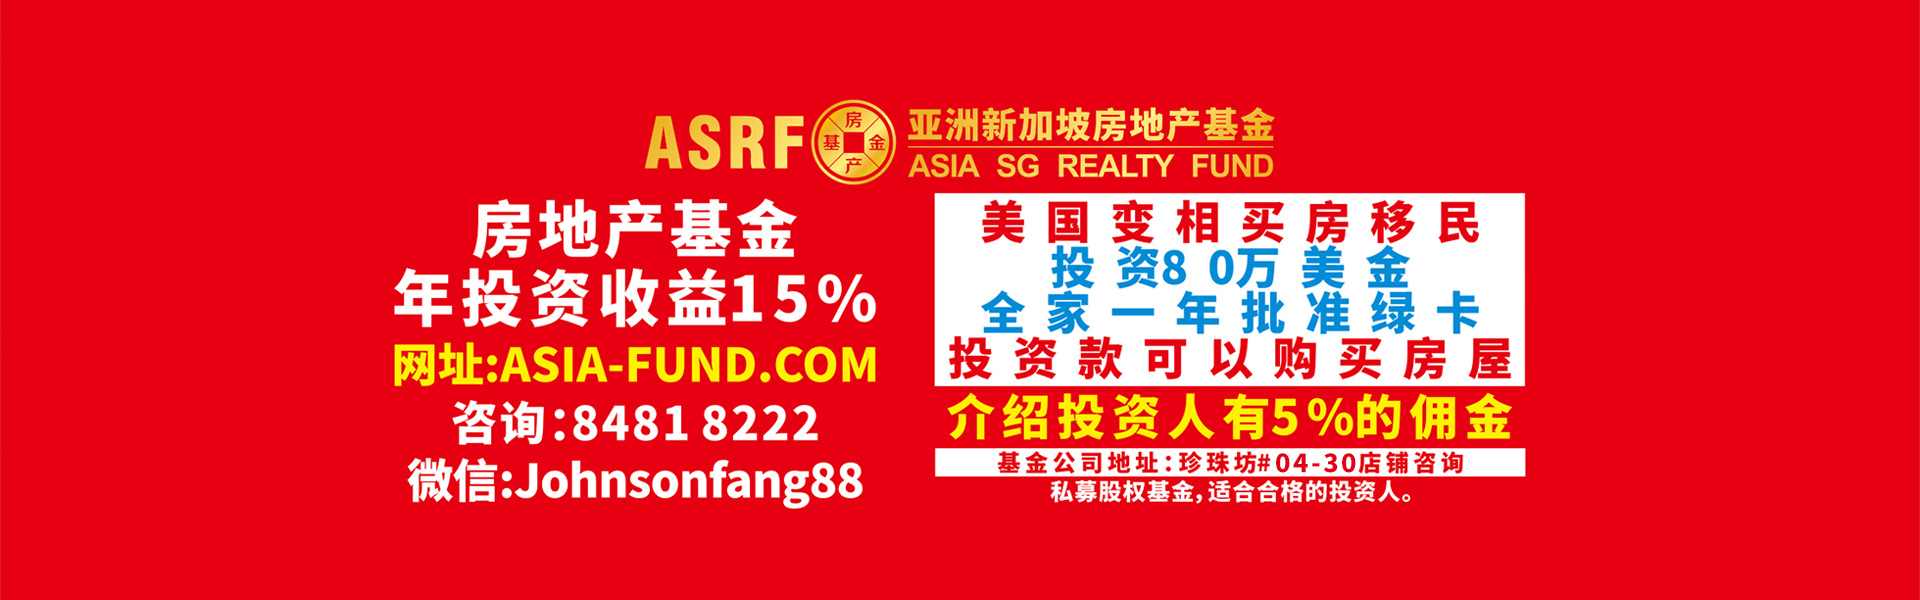 ASIA SG REALTY FUND